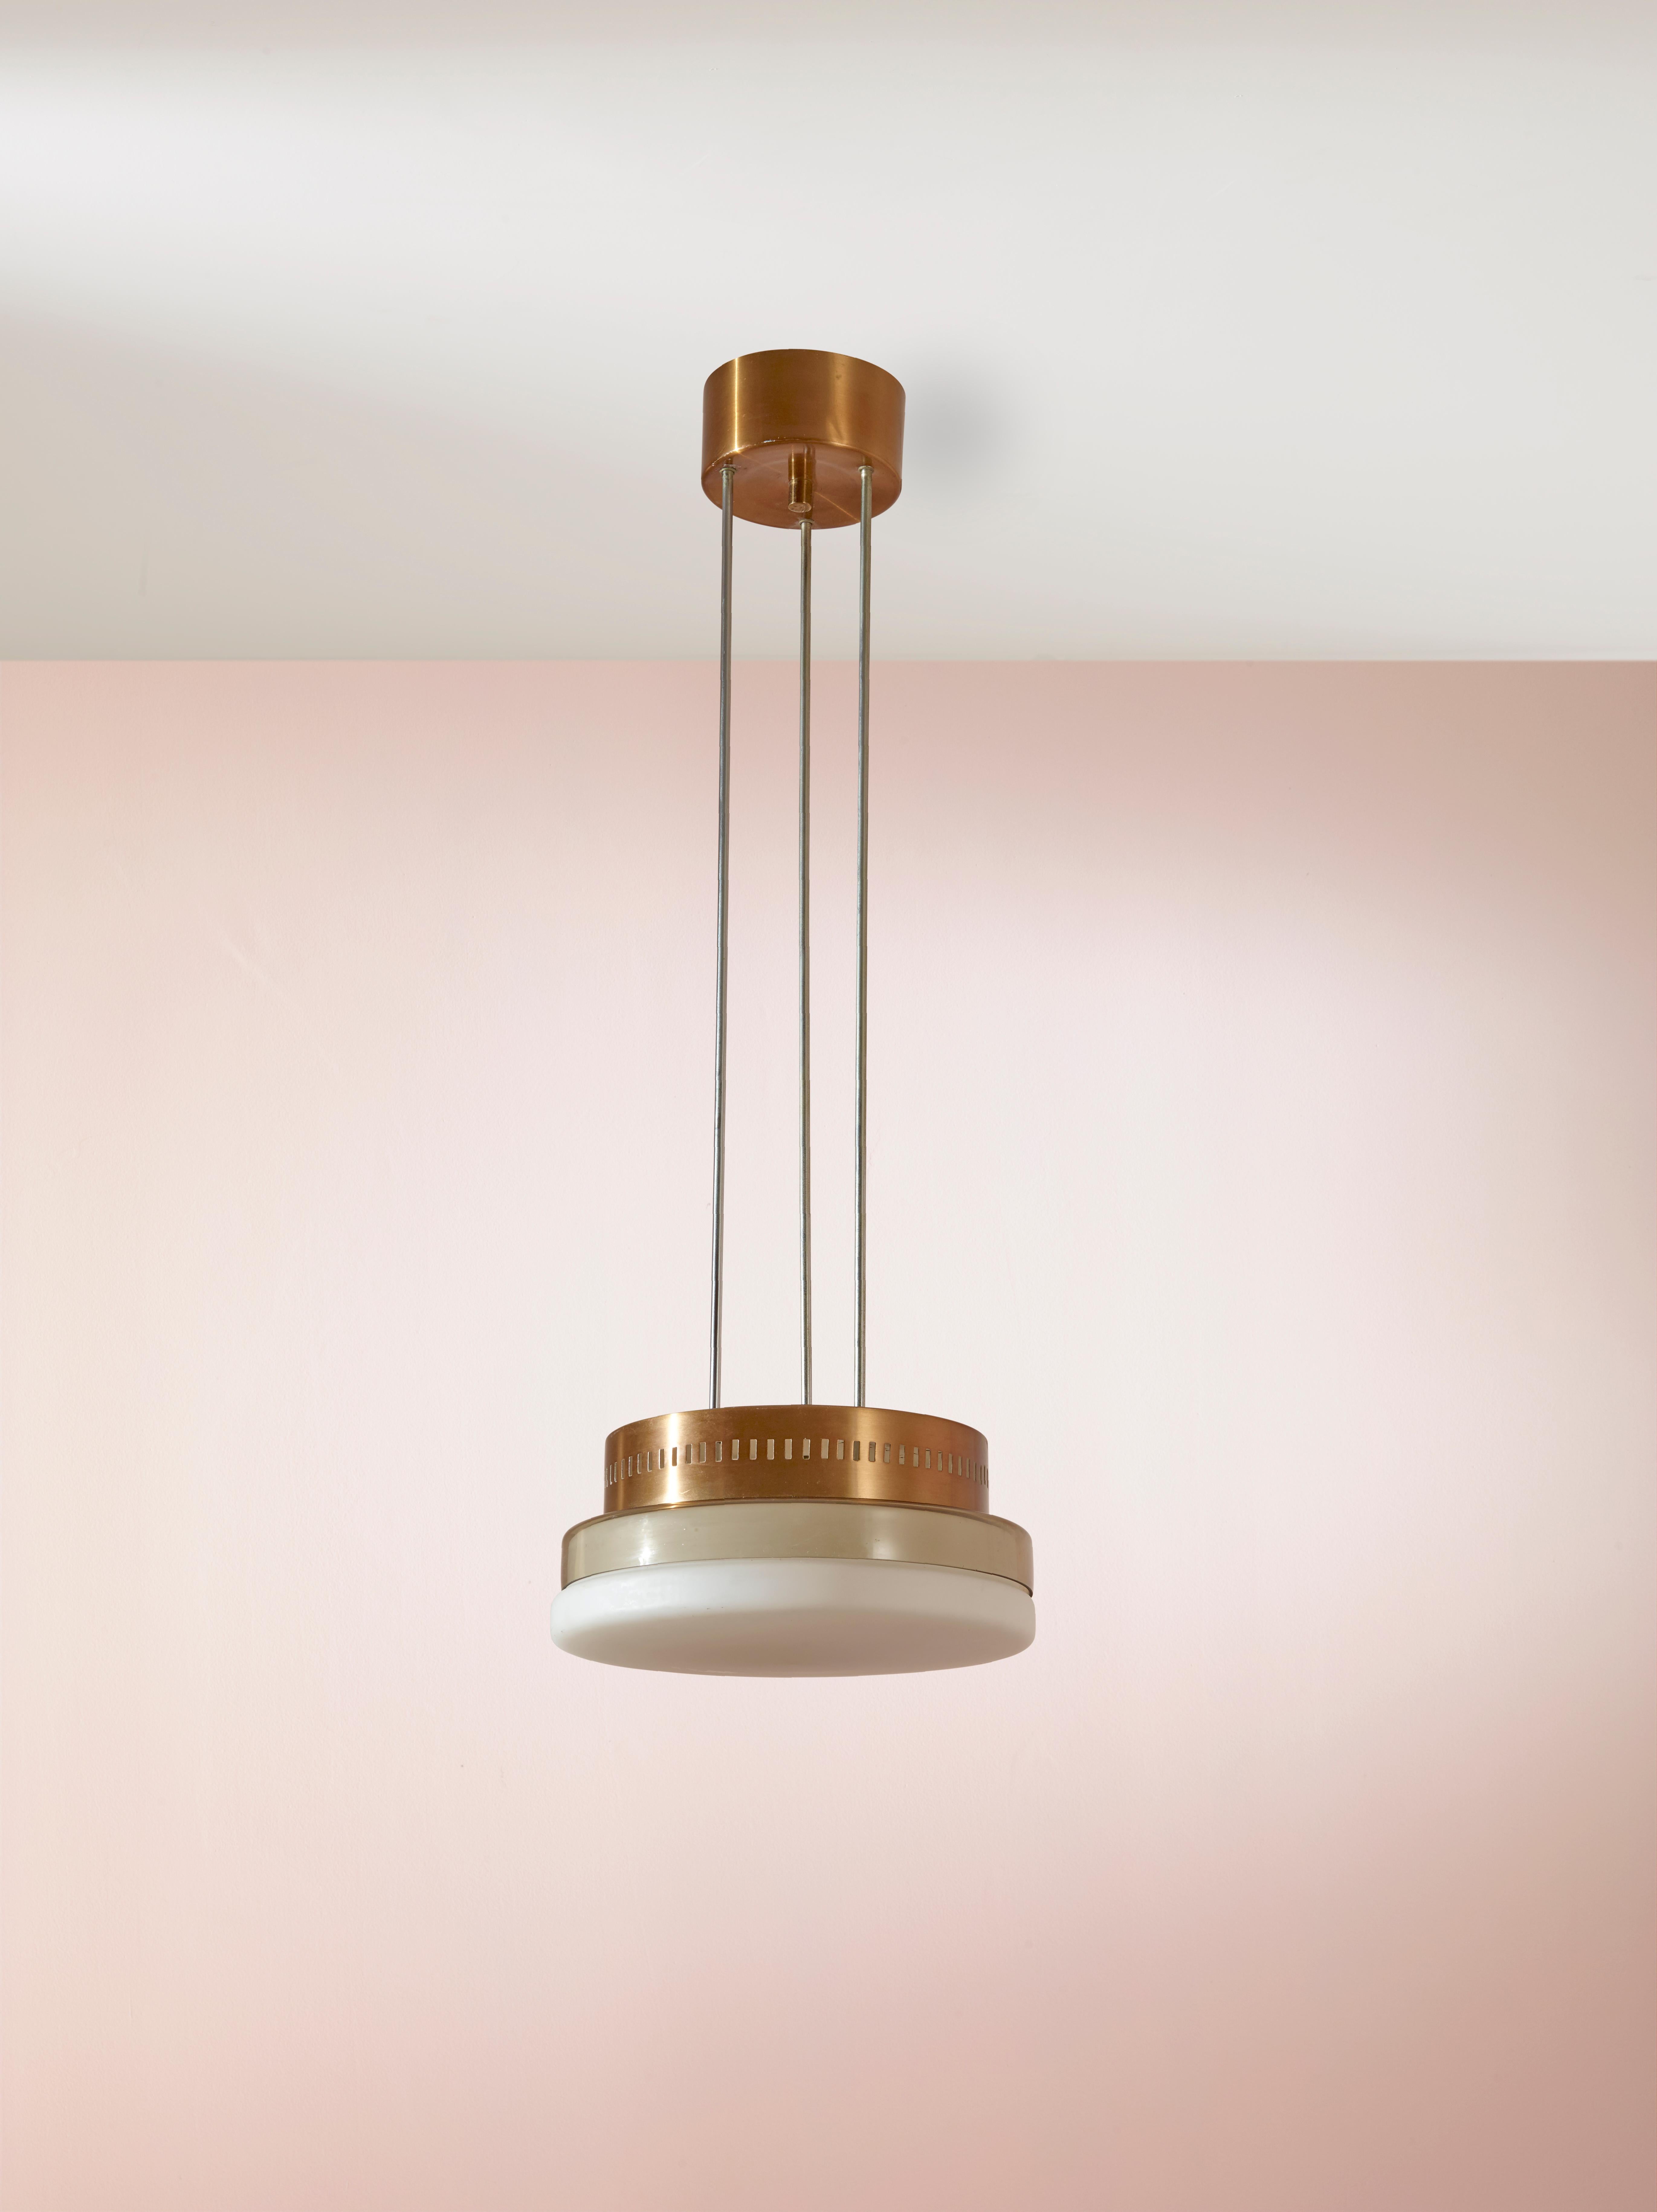 Mid-20th Century Midcentury Stilnovo Style Pendant Light Made of Glass and Copper, Italy, 1960s For Sale